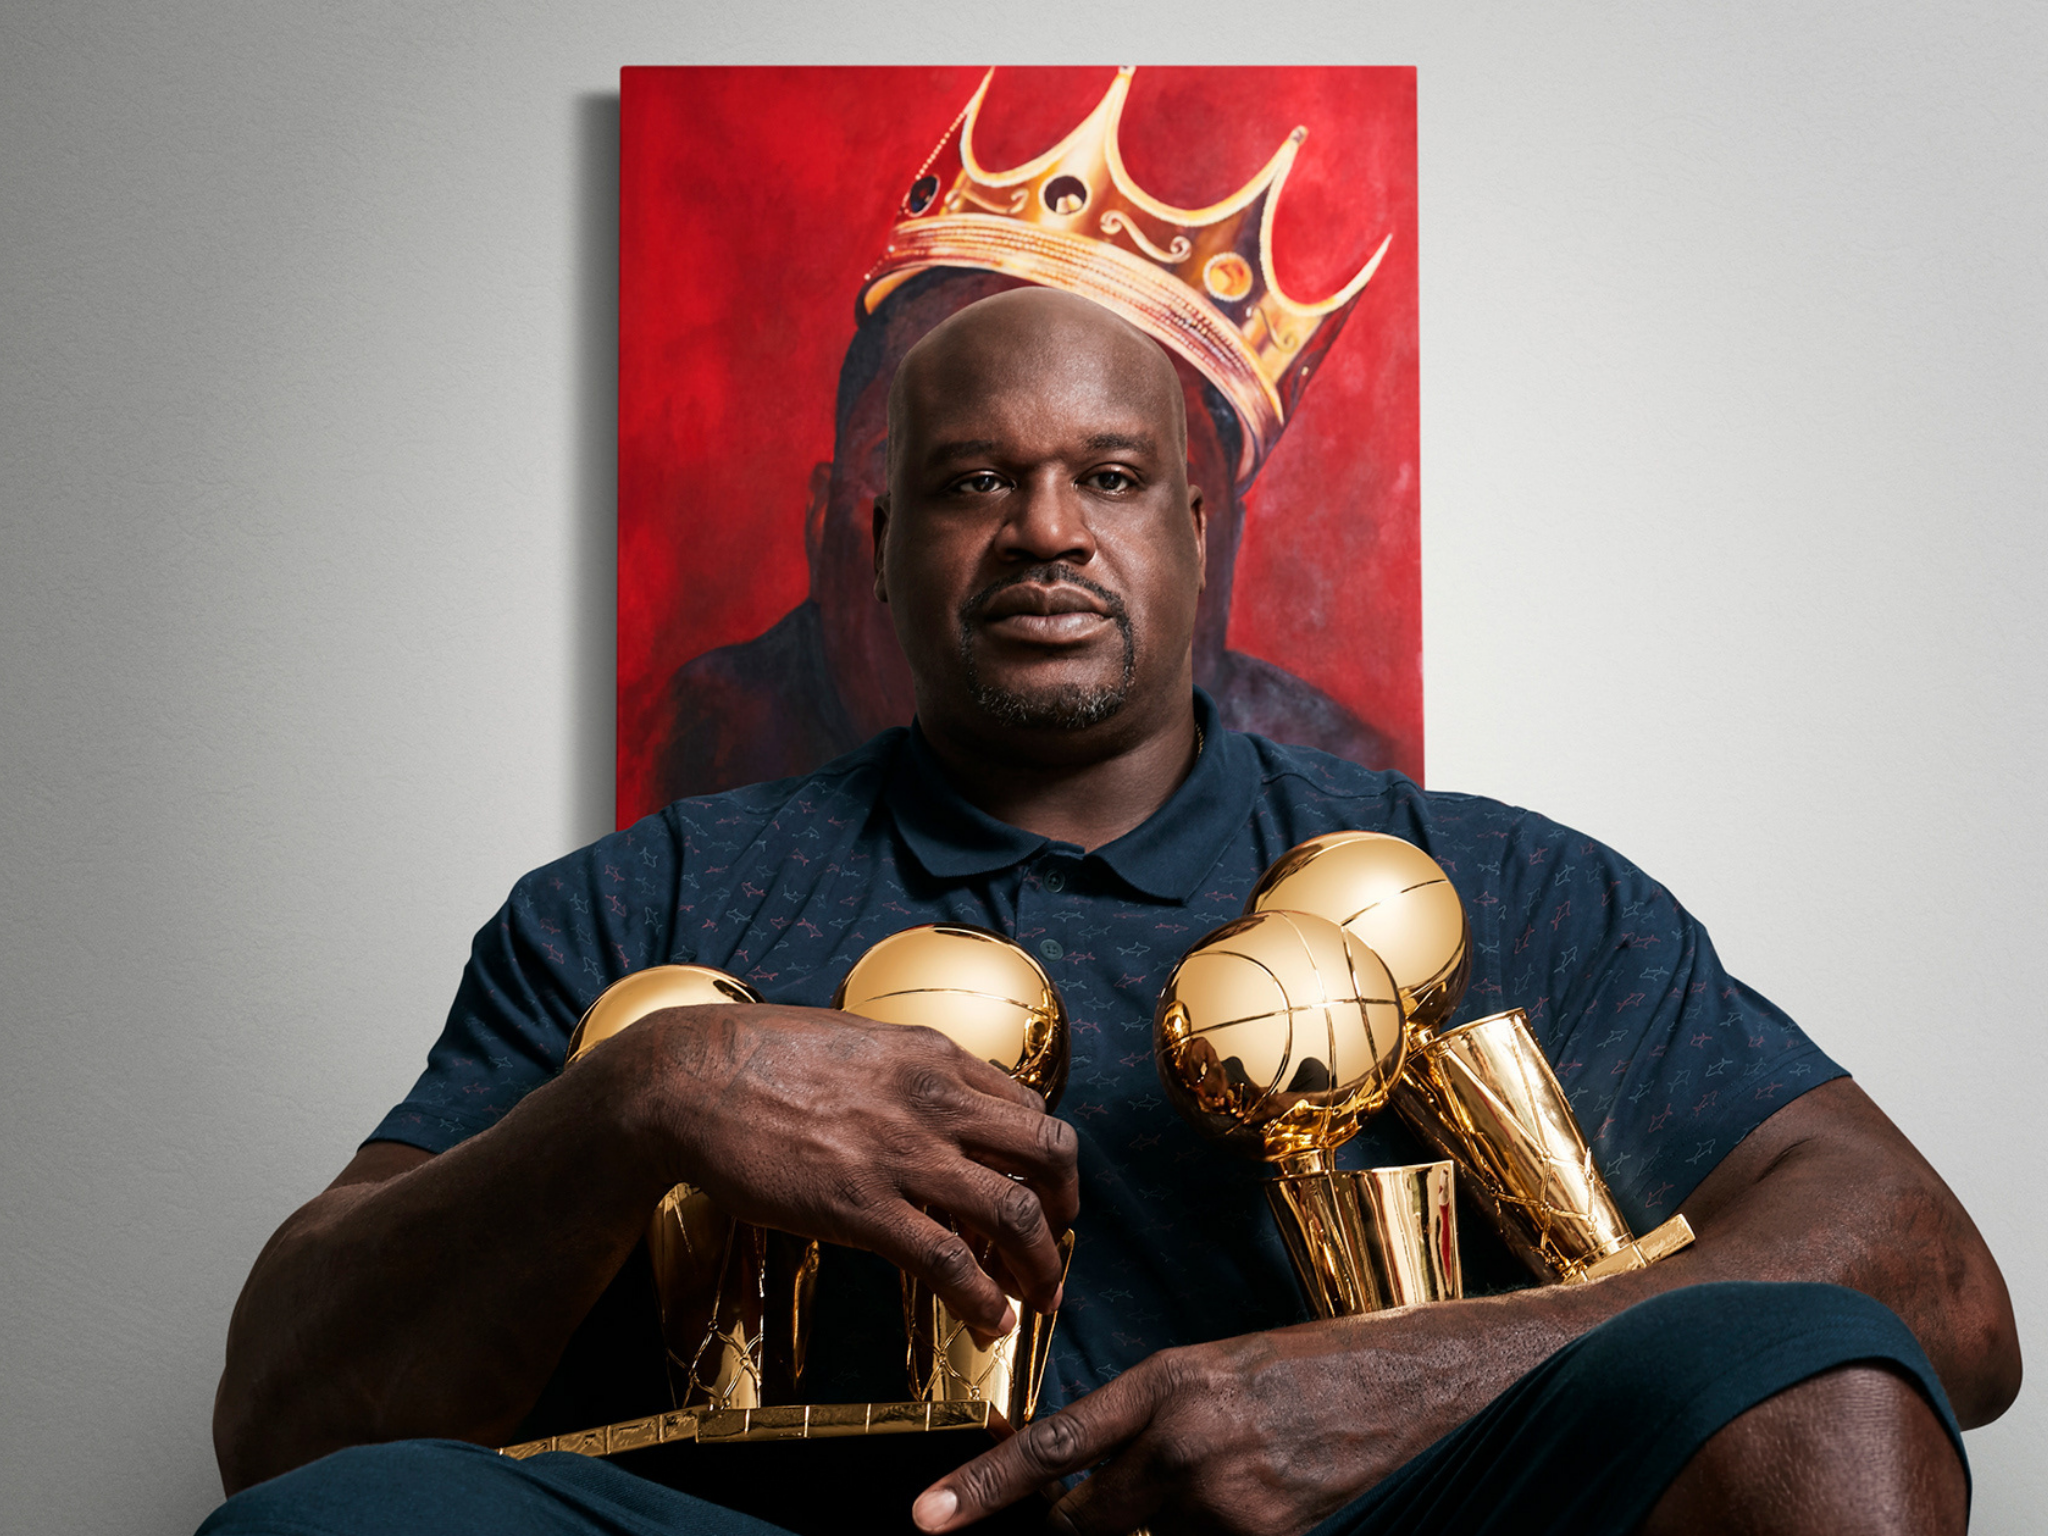 NBA superstar Shaquille O'Neal is coming to Sydney and Melbourne